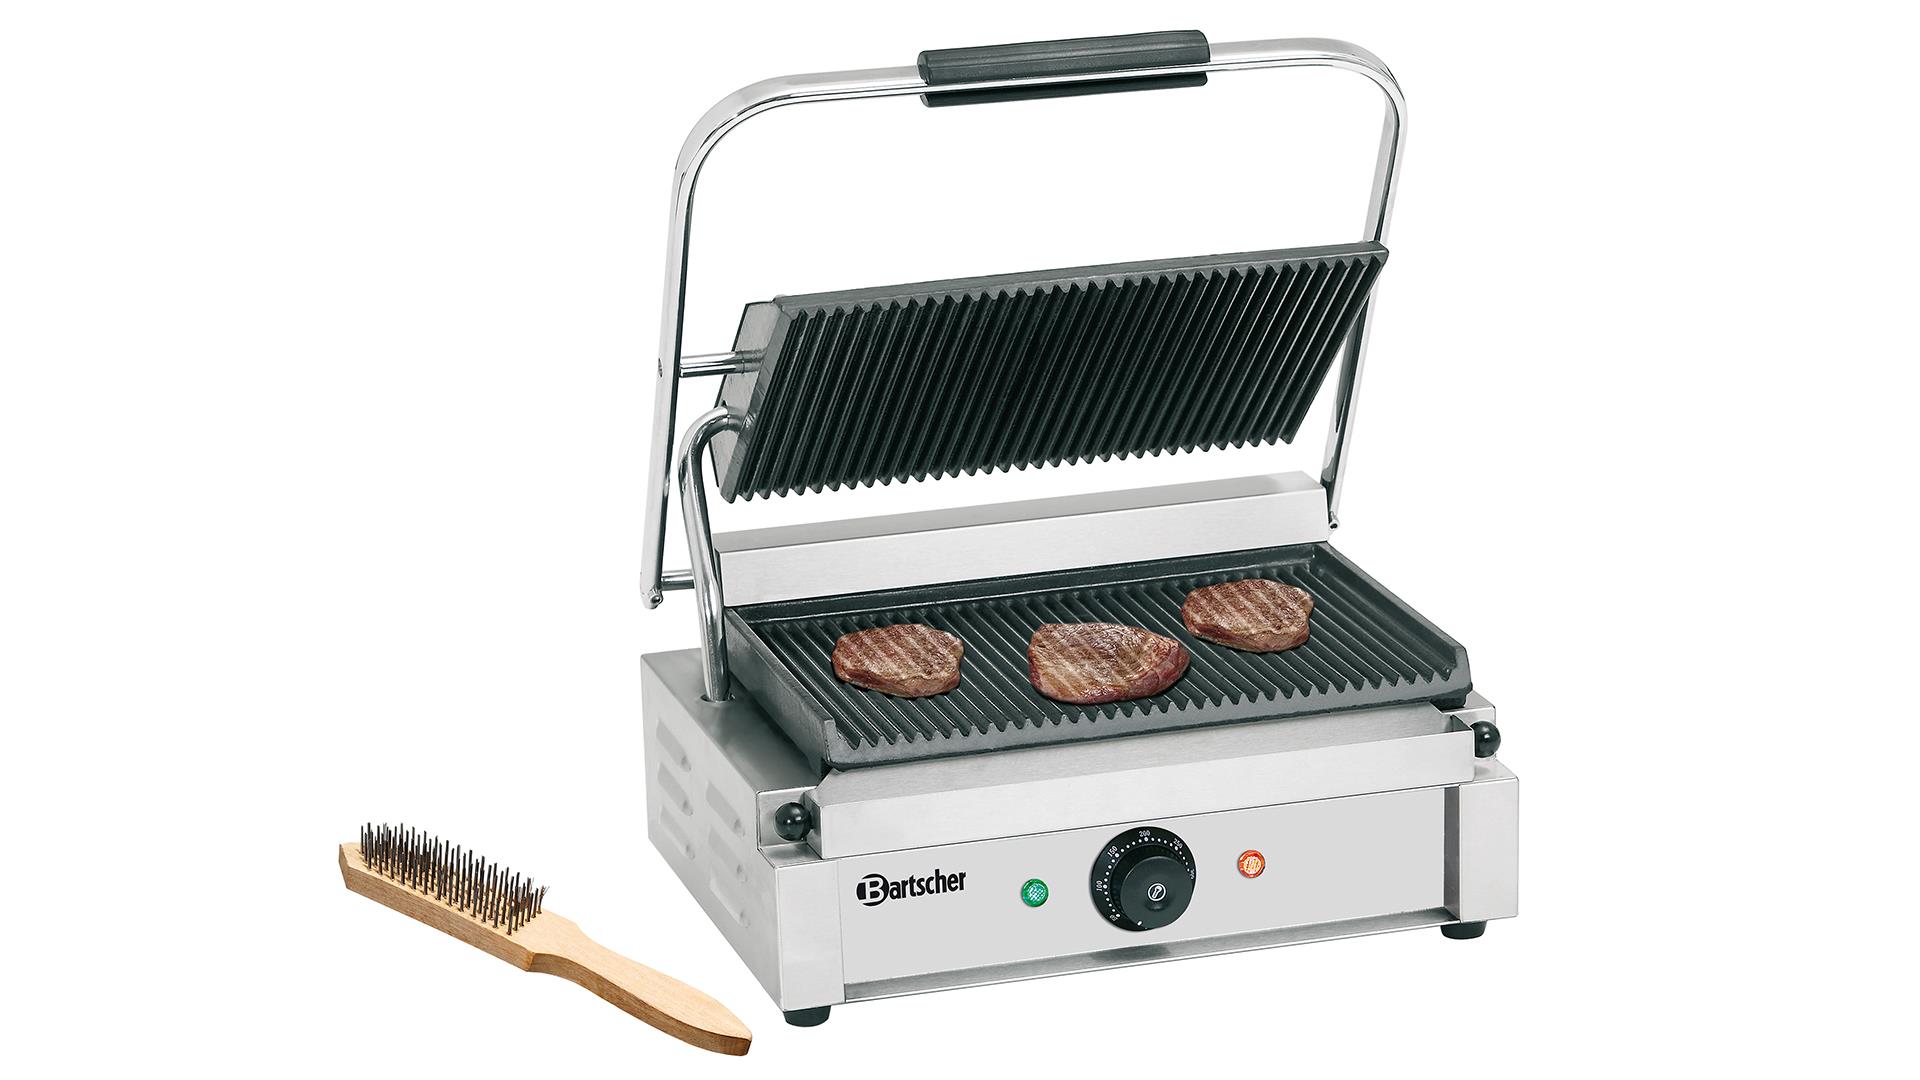 BARTSCHER contact grill "Panini" 1R